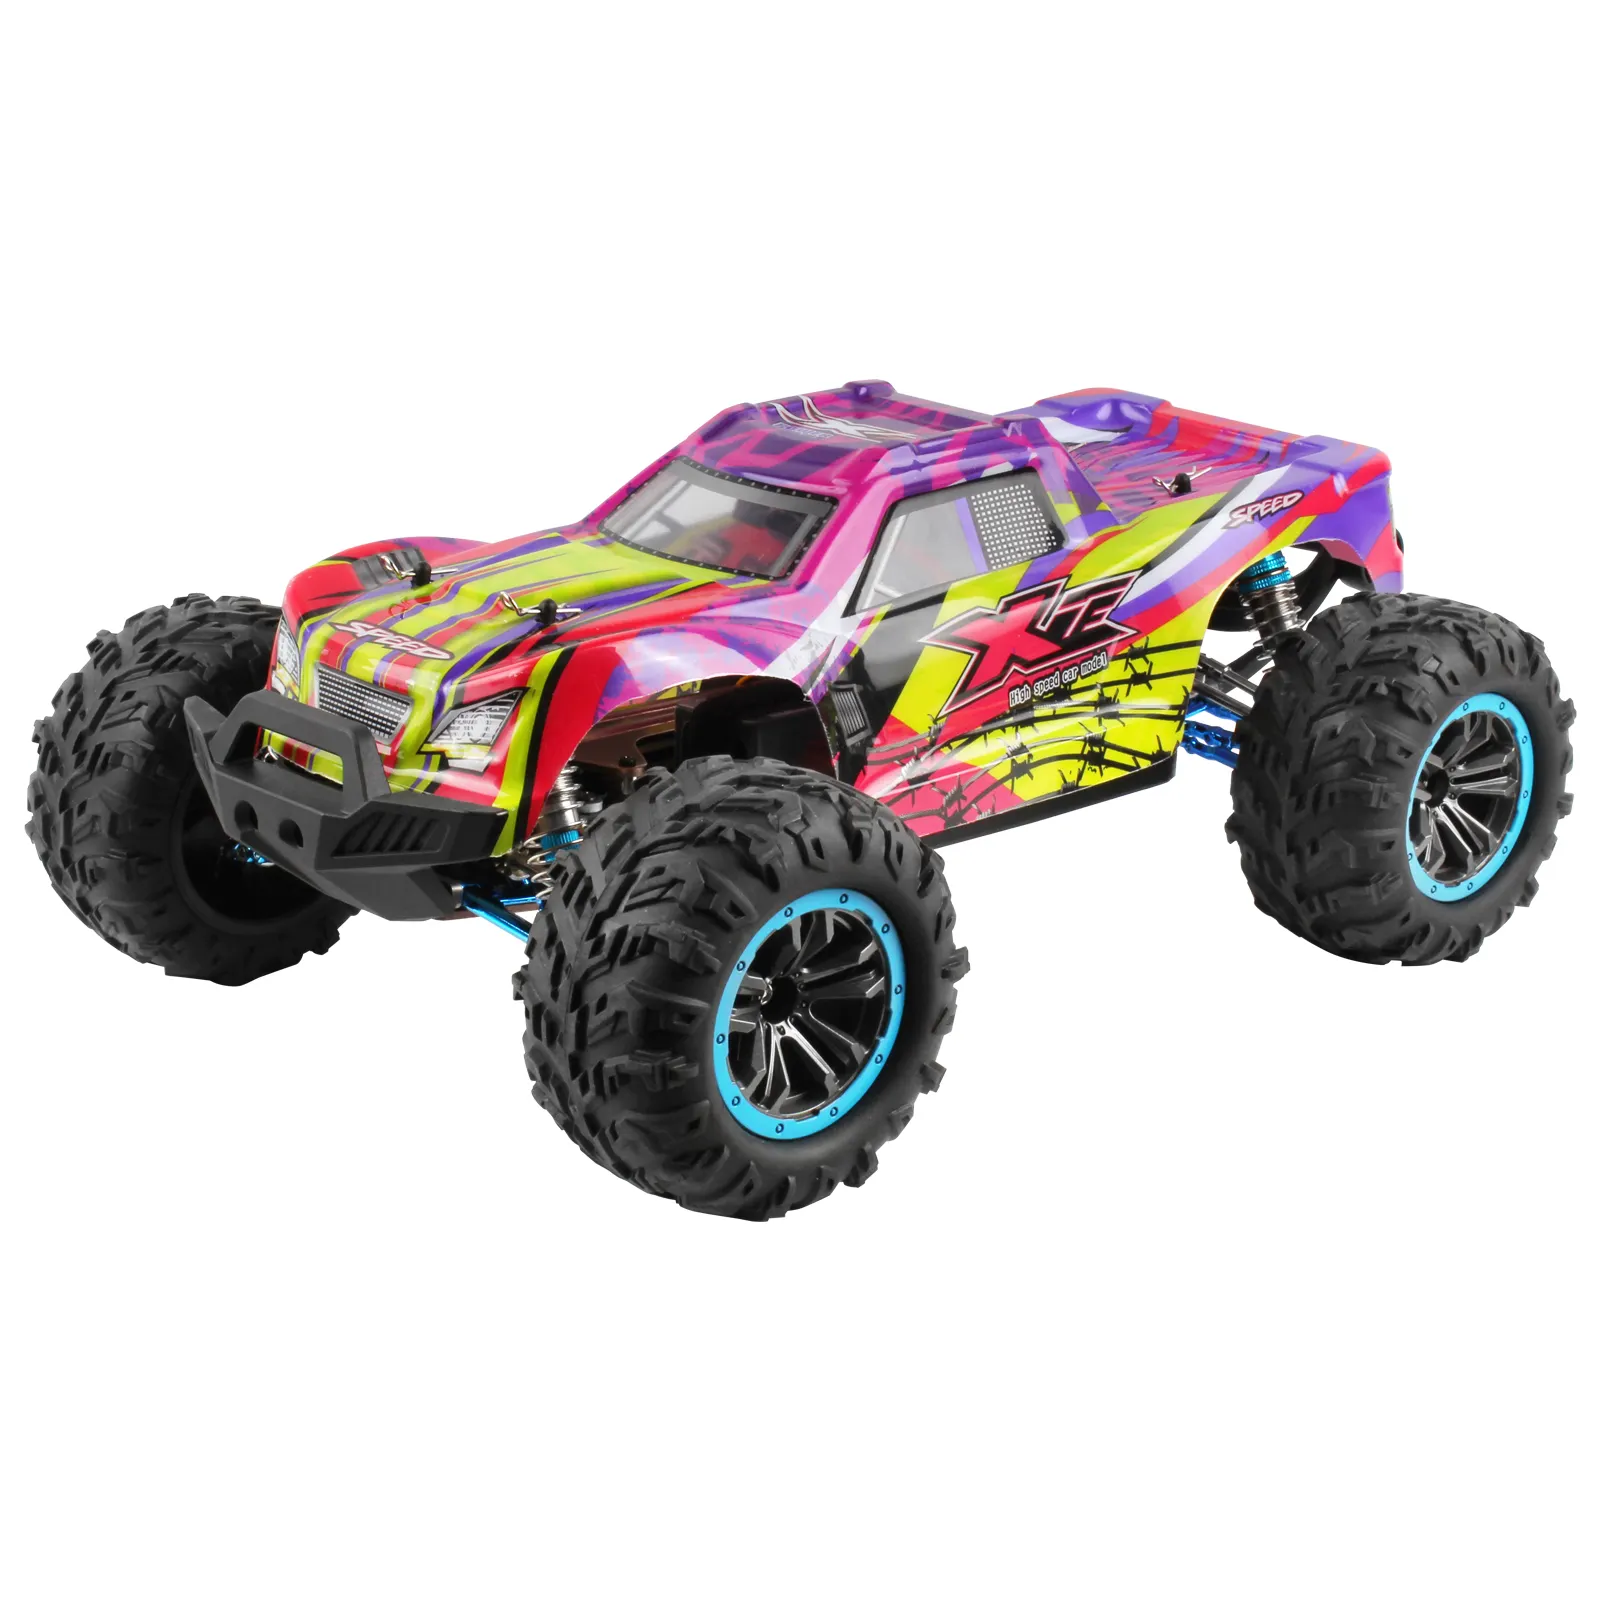 2021 New Arrival Original XLF/RC Climbing Car Toys 1/10 High Speed 4WD 70KM/H Remote Control RC Car monster truck